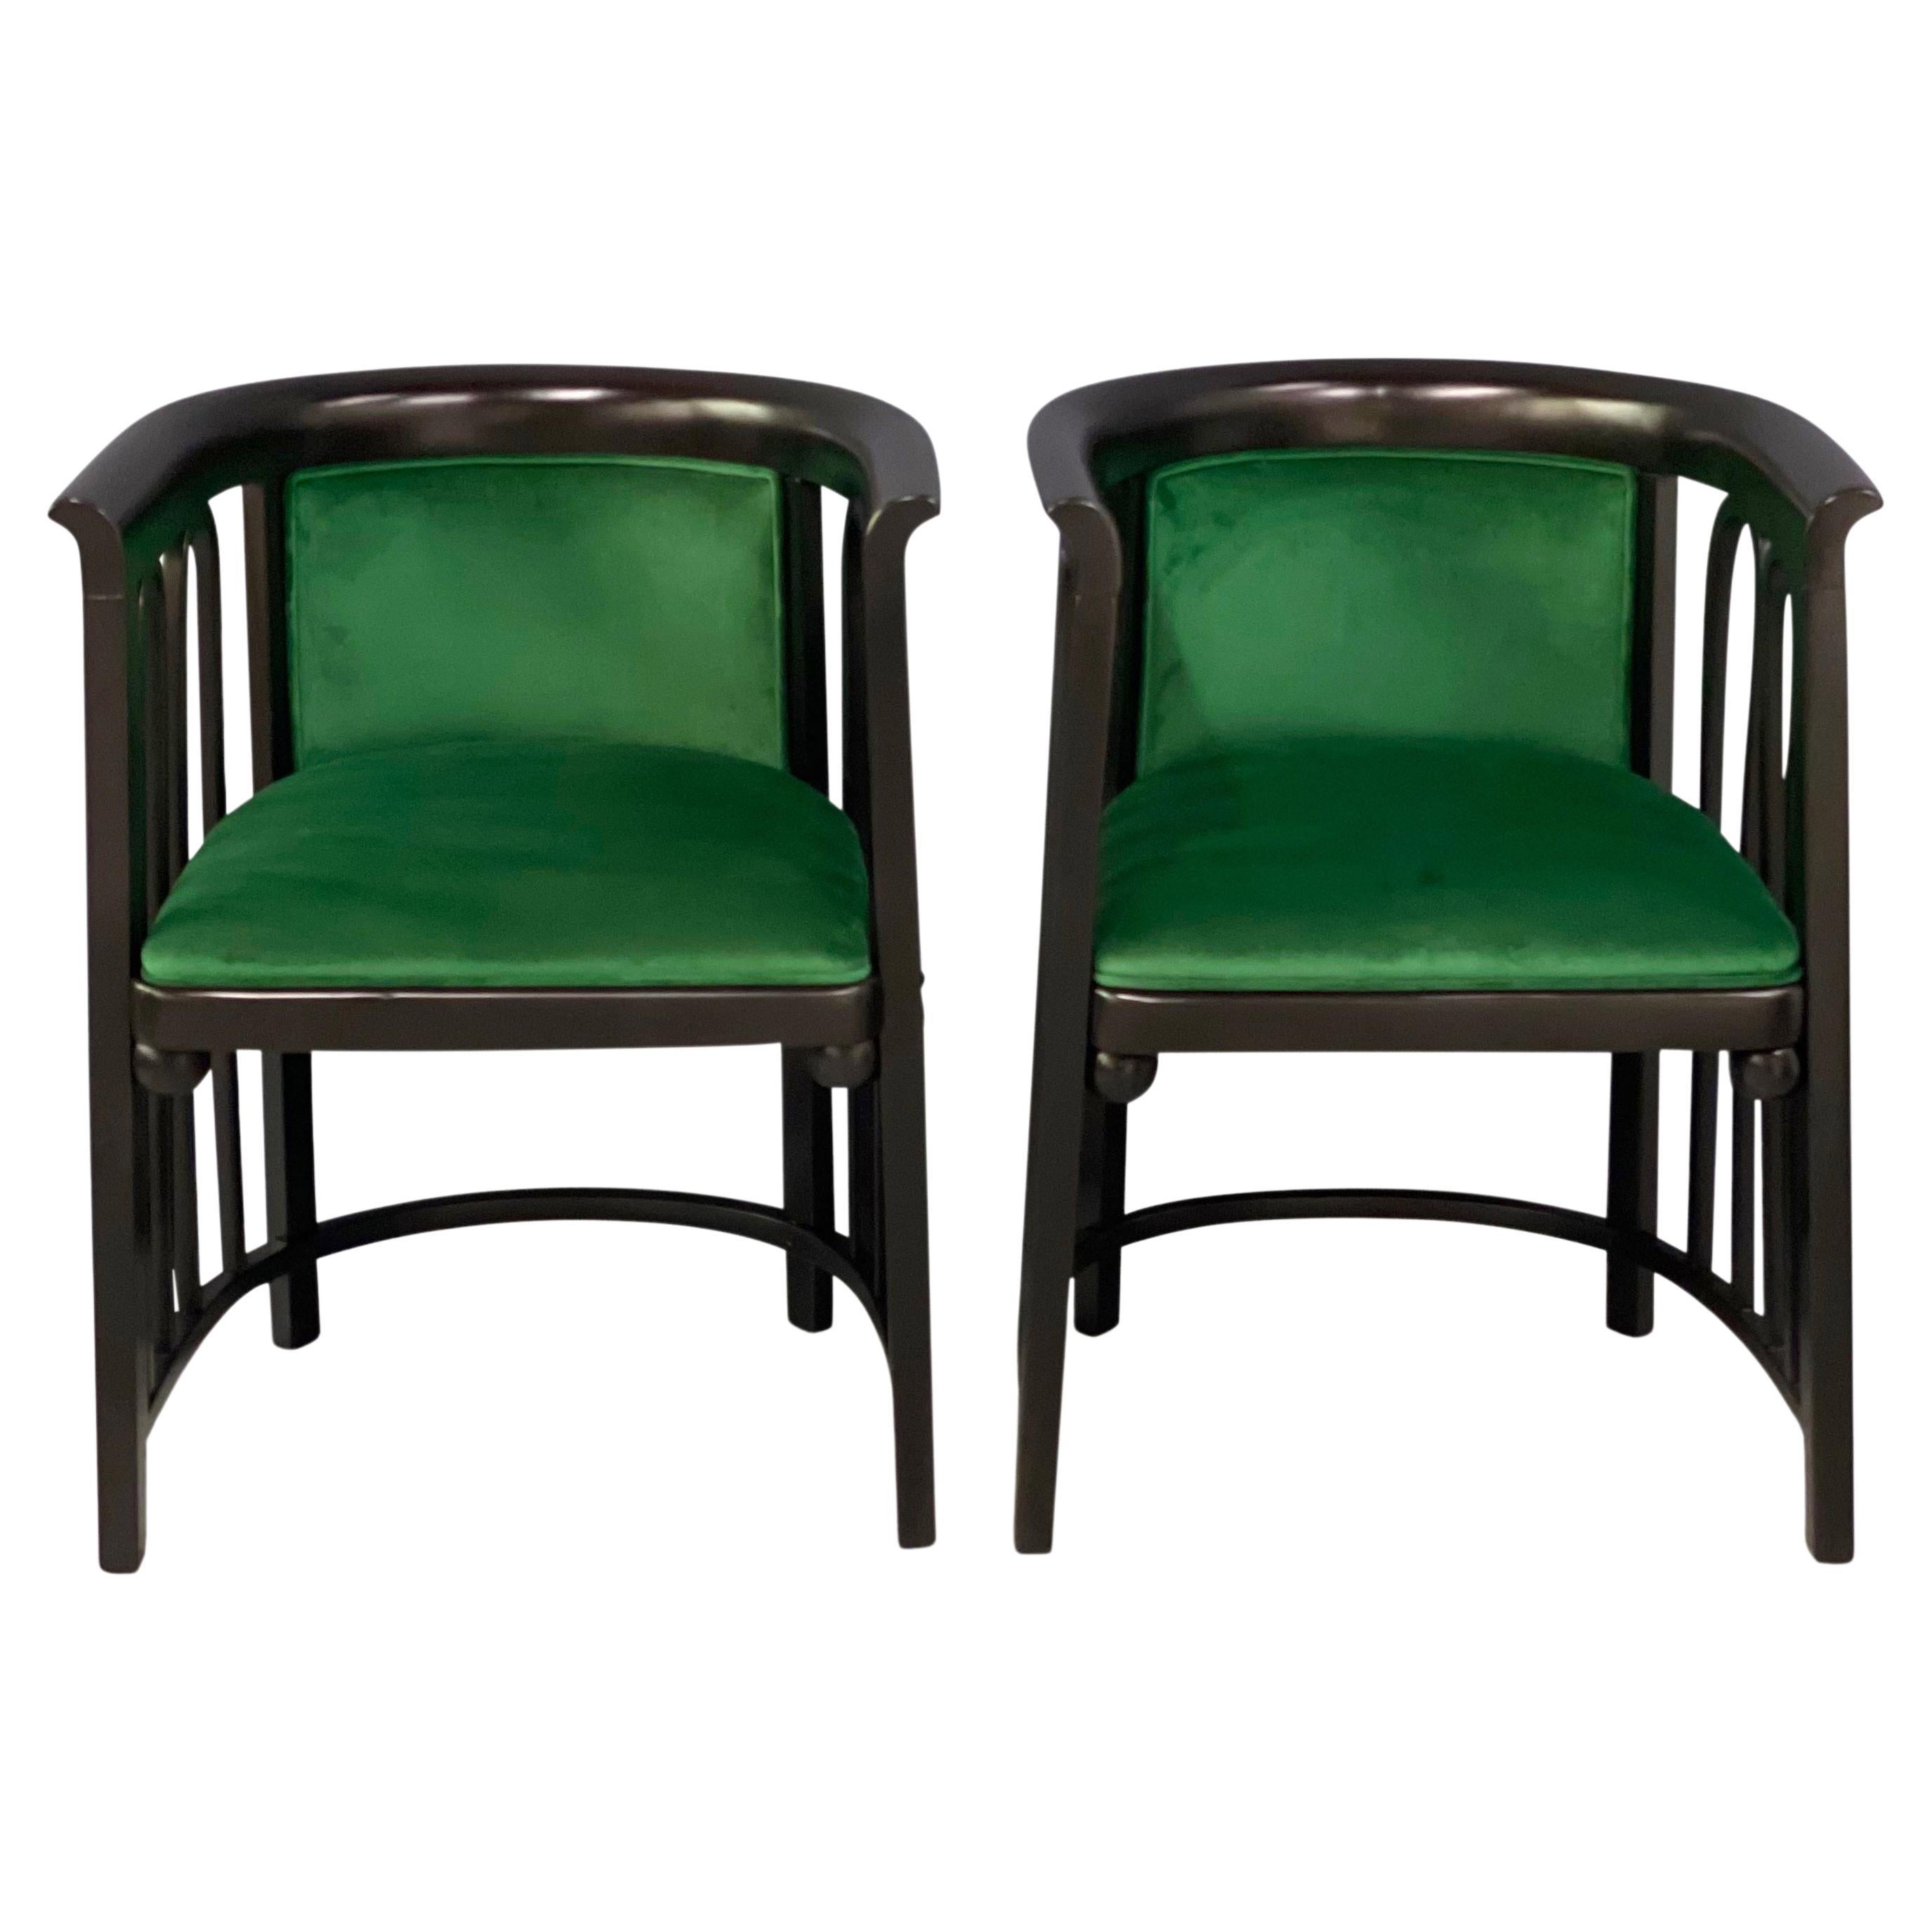 These lounge chairs from the early 1900s have an unusual bentwood design that makes them extremely rare. They have been reupholstered in a beautiful emerald green velvet and also the frames have been refinished in a satin black finish.